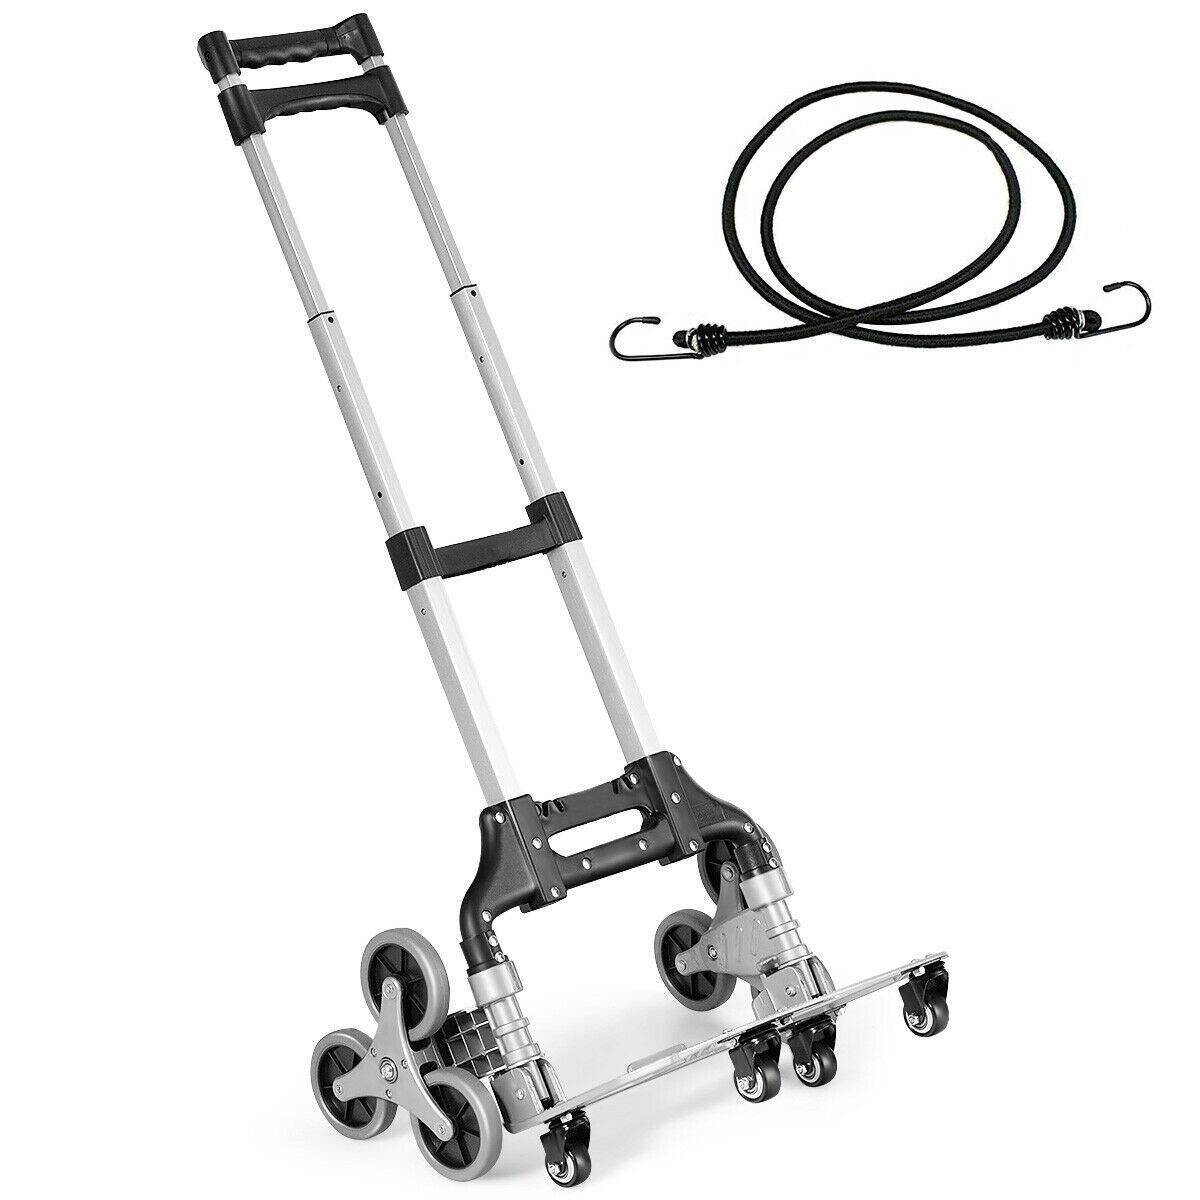 Costway Portable Folding Stair Climbing Hand Truck - $48.95 + Free Shipping